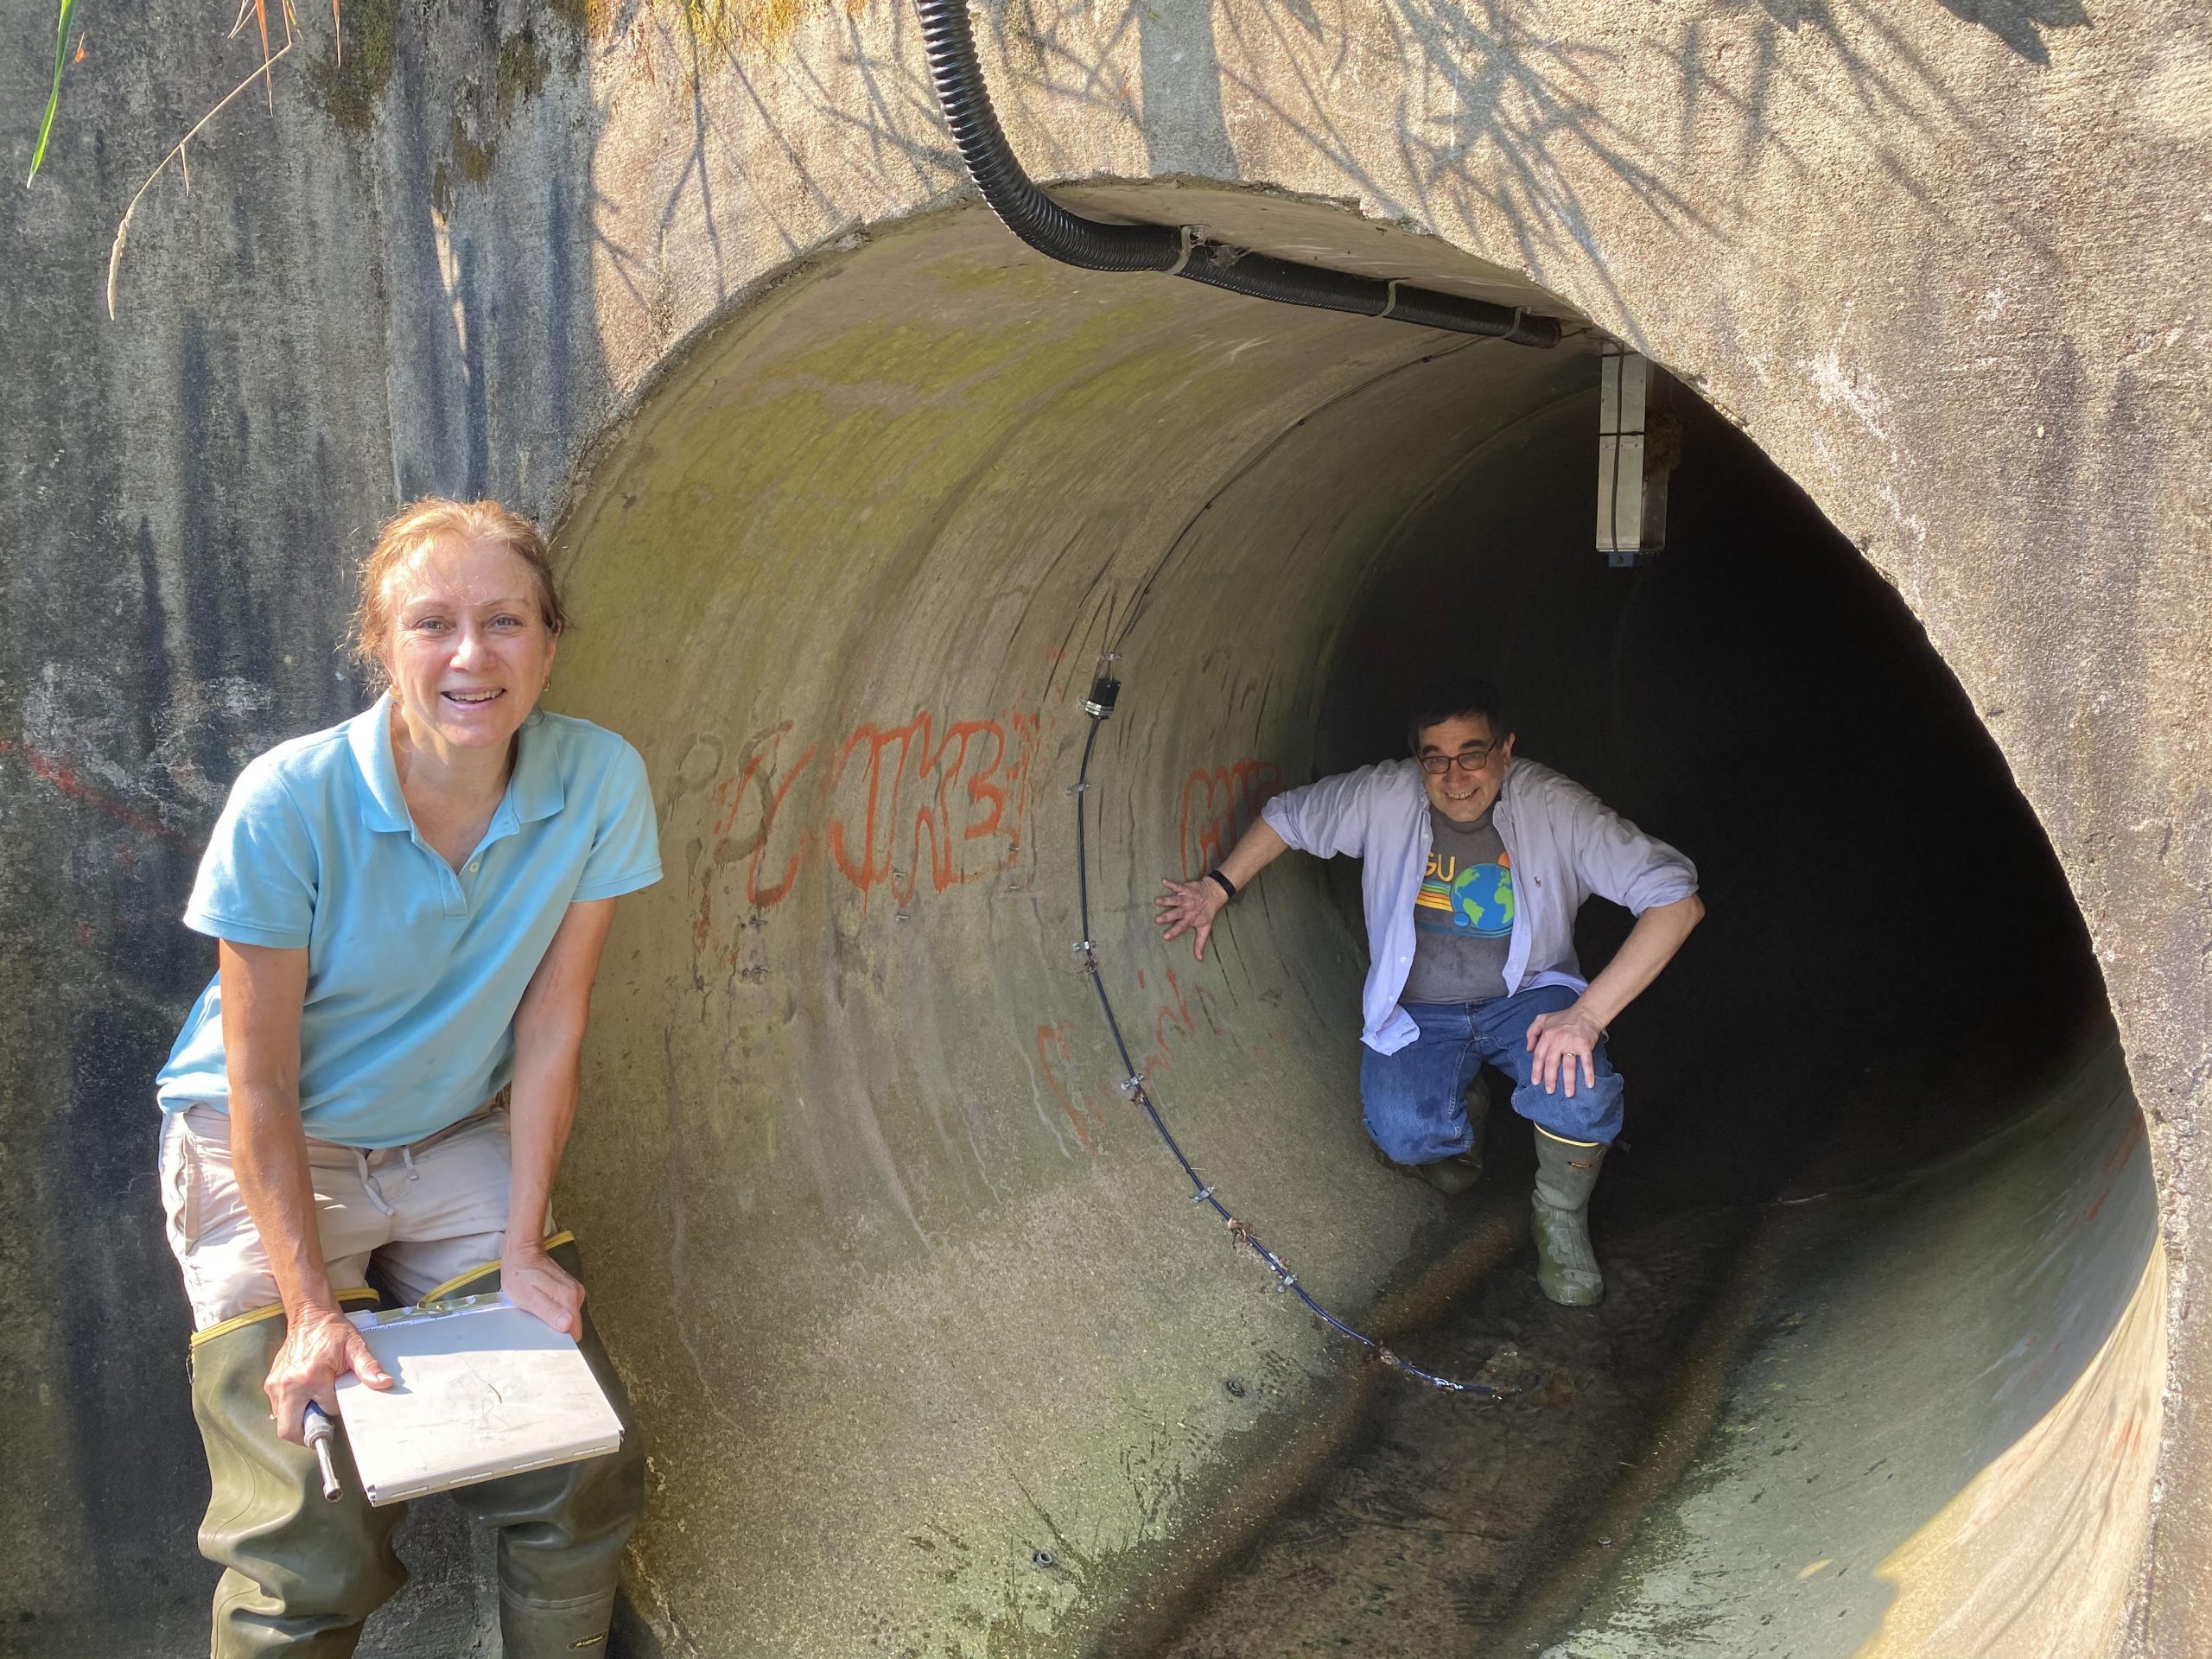 Man and woman in field research attire stand next to and inside a concrete tunnel at a research site.